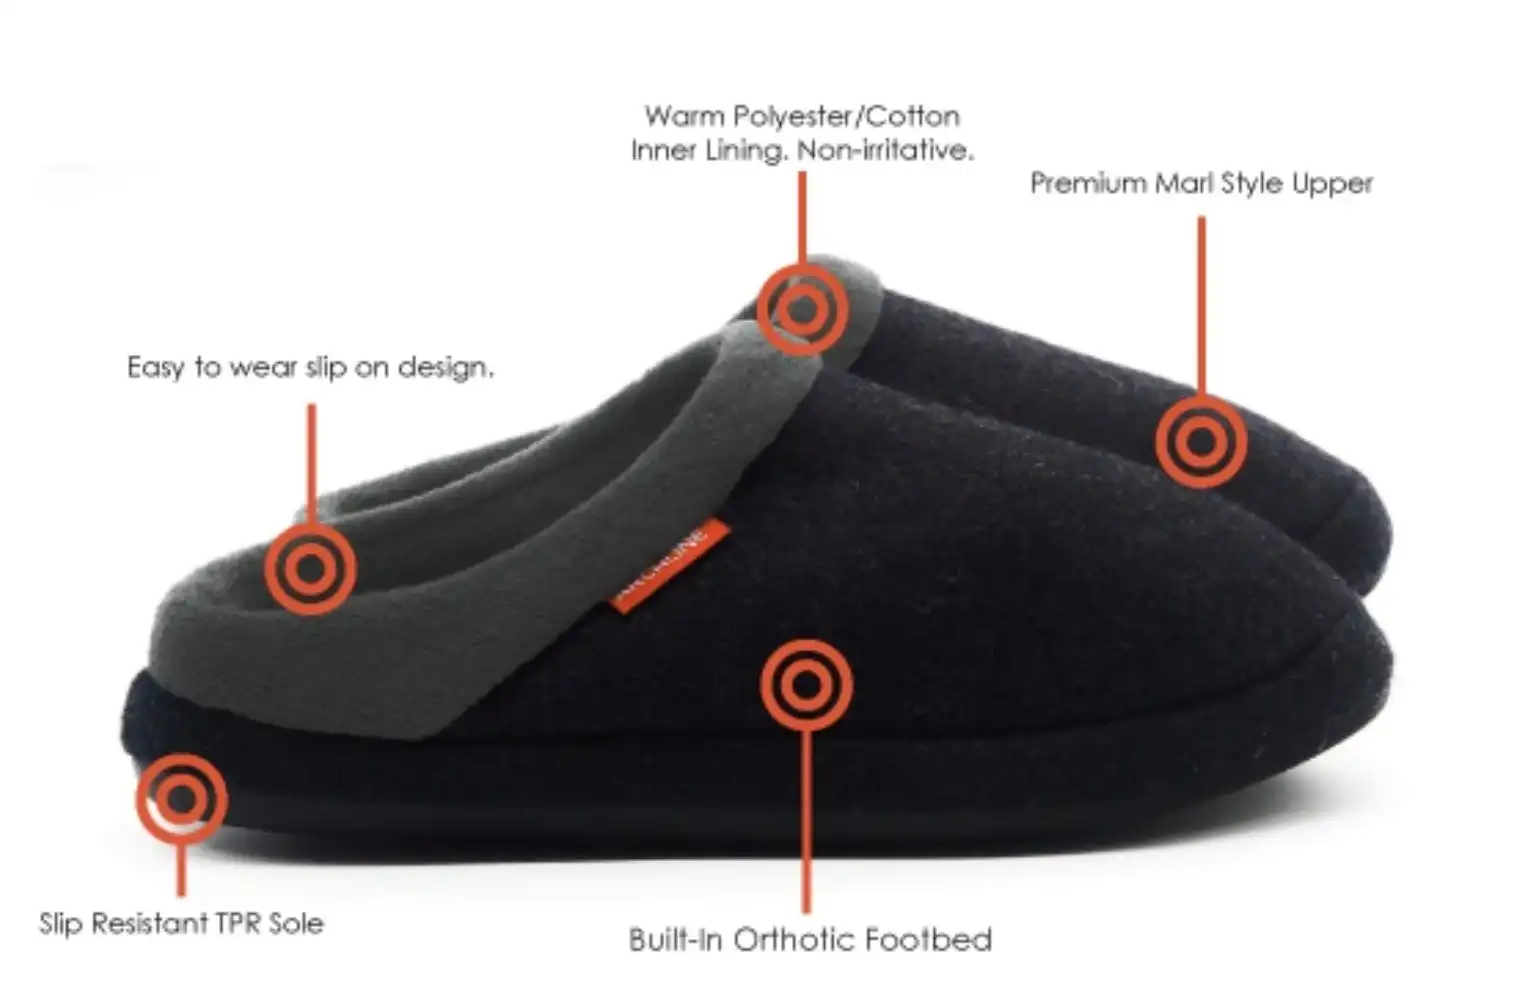 Archline Orthotic Slippers Slip On Arch Scuffs Medical Pain Relief Moccasins